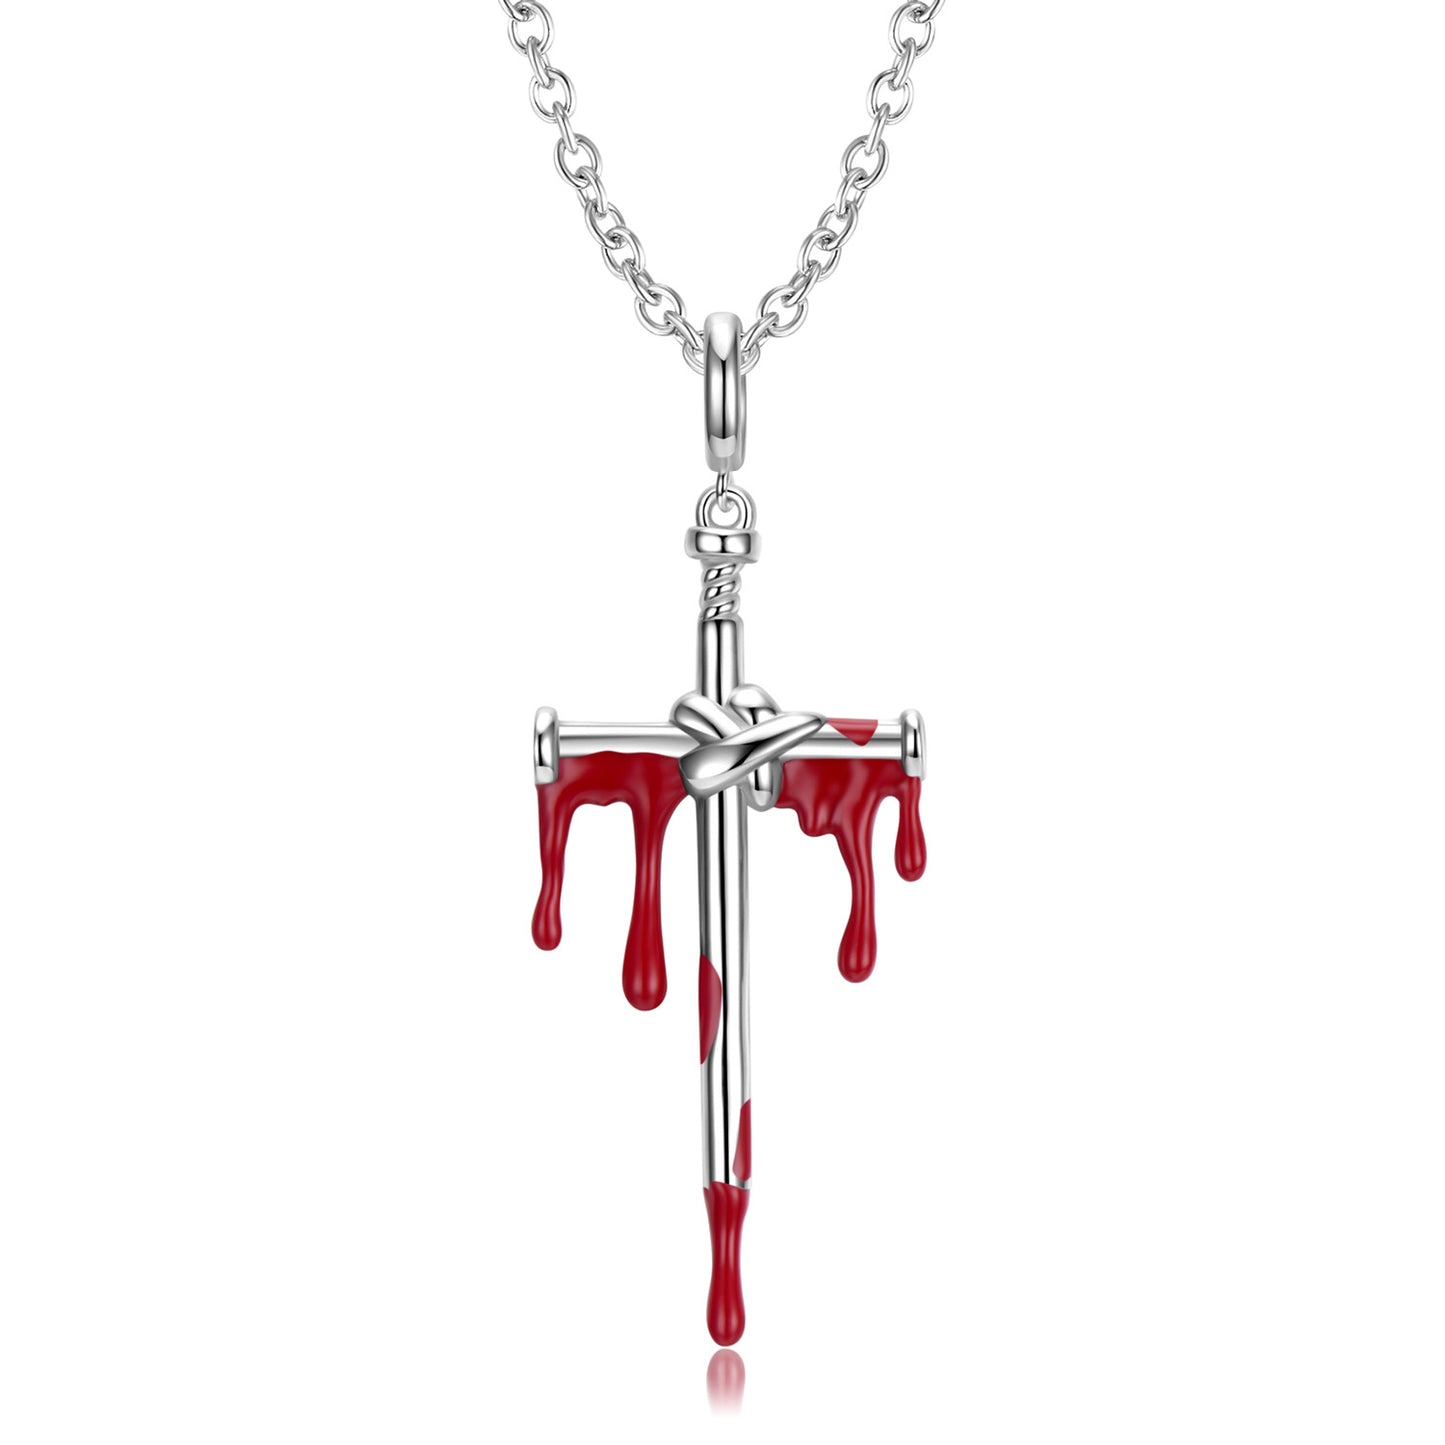 Dropping Blood Cross Sword Pendant Silver Necklace